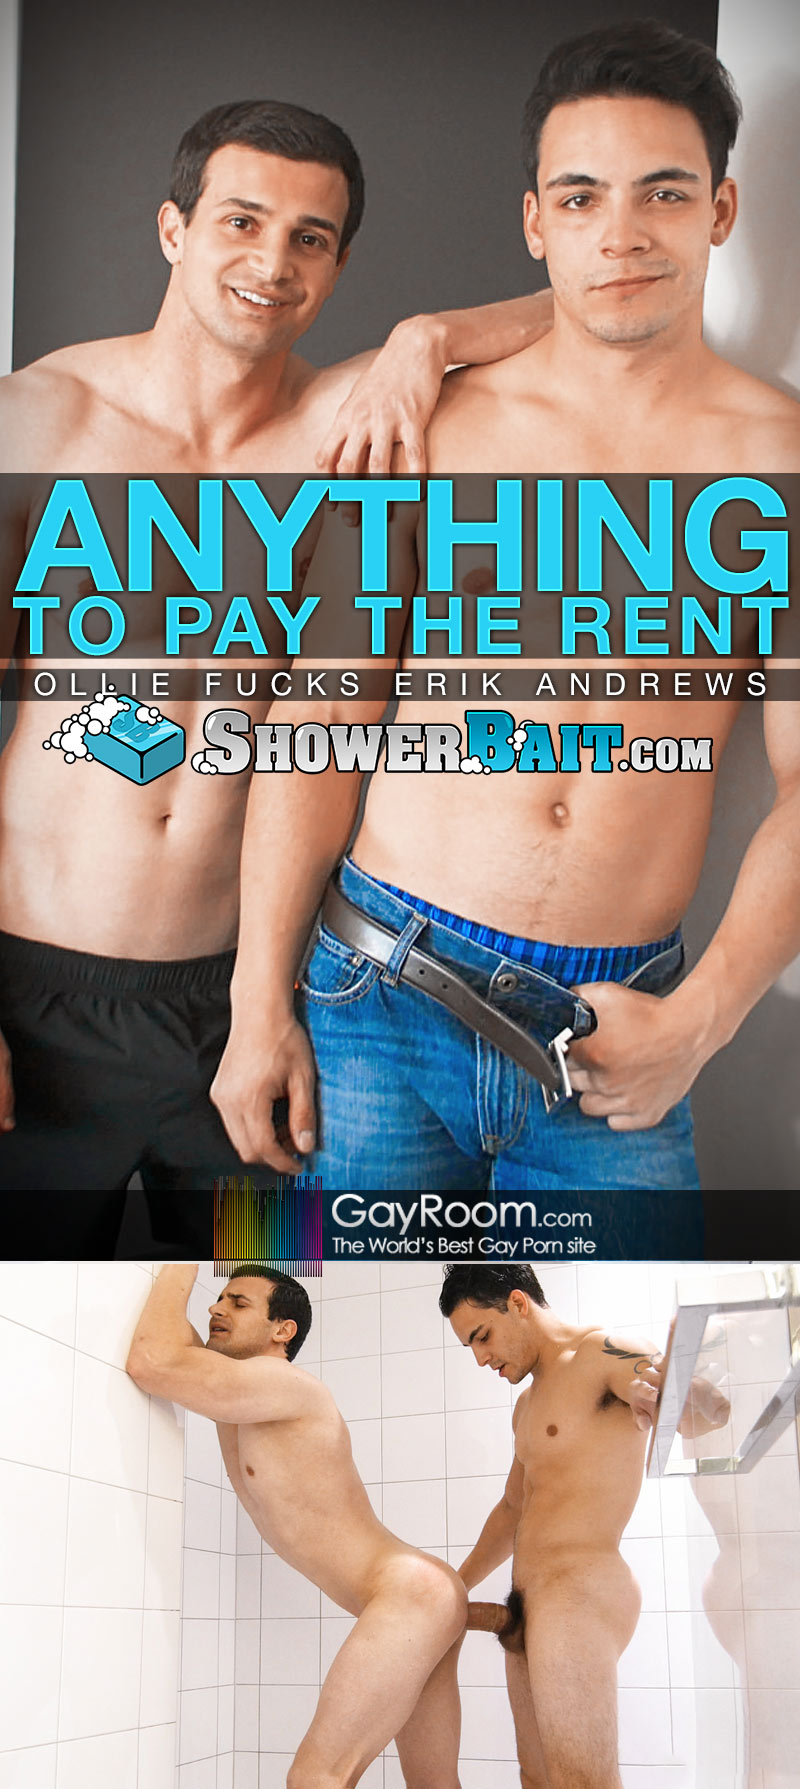 Anything to Pay the Rent (Ollie Fucks Erik Andrews) at Shower Bait